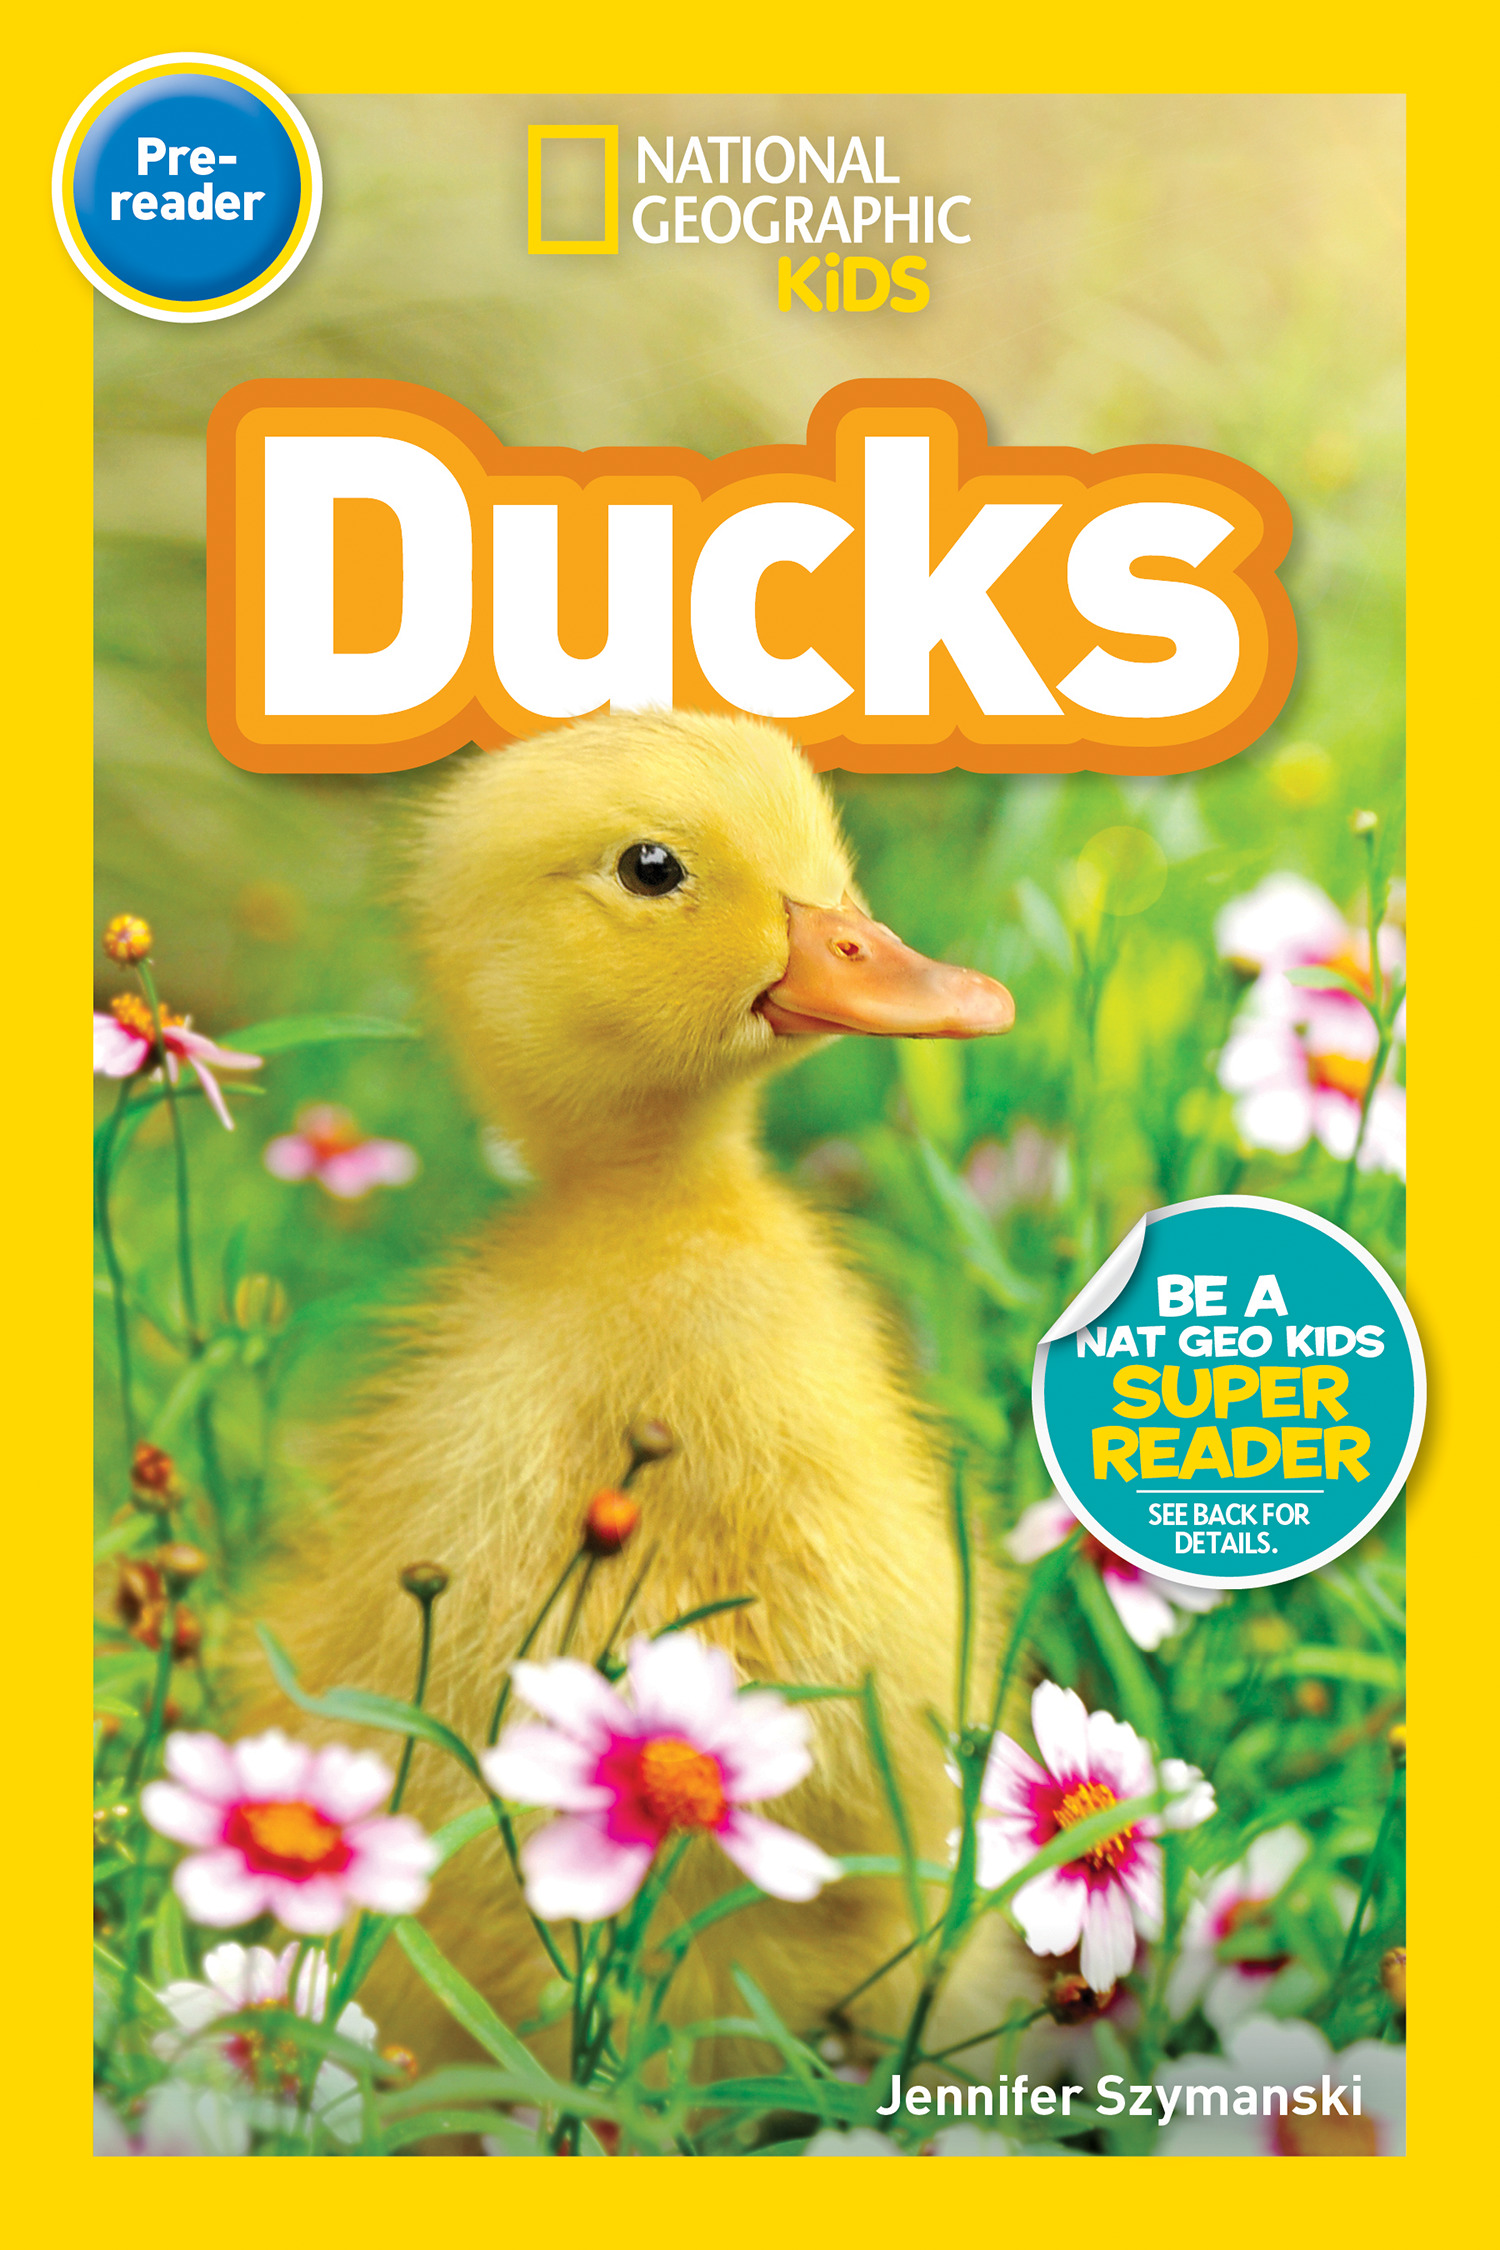 National Geographic Readers: Ducks (Pre-reader) | First reader